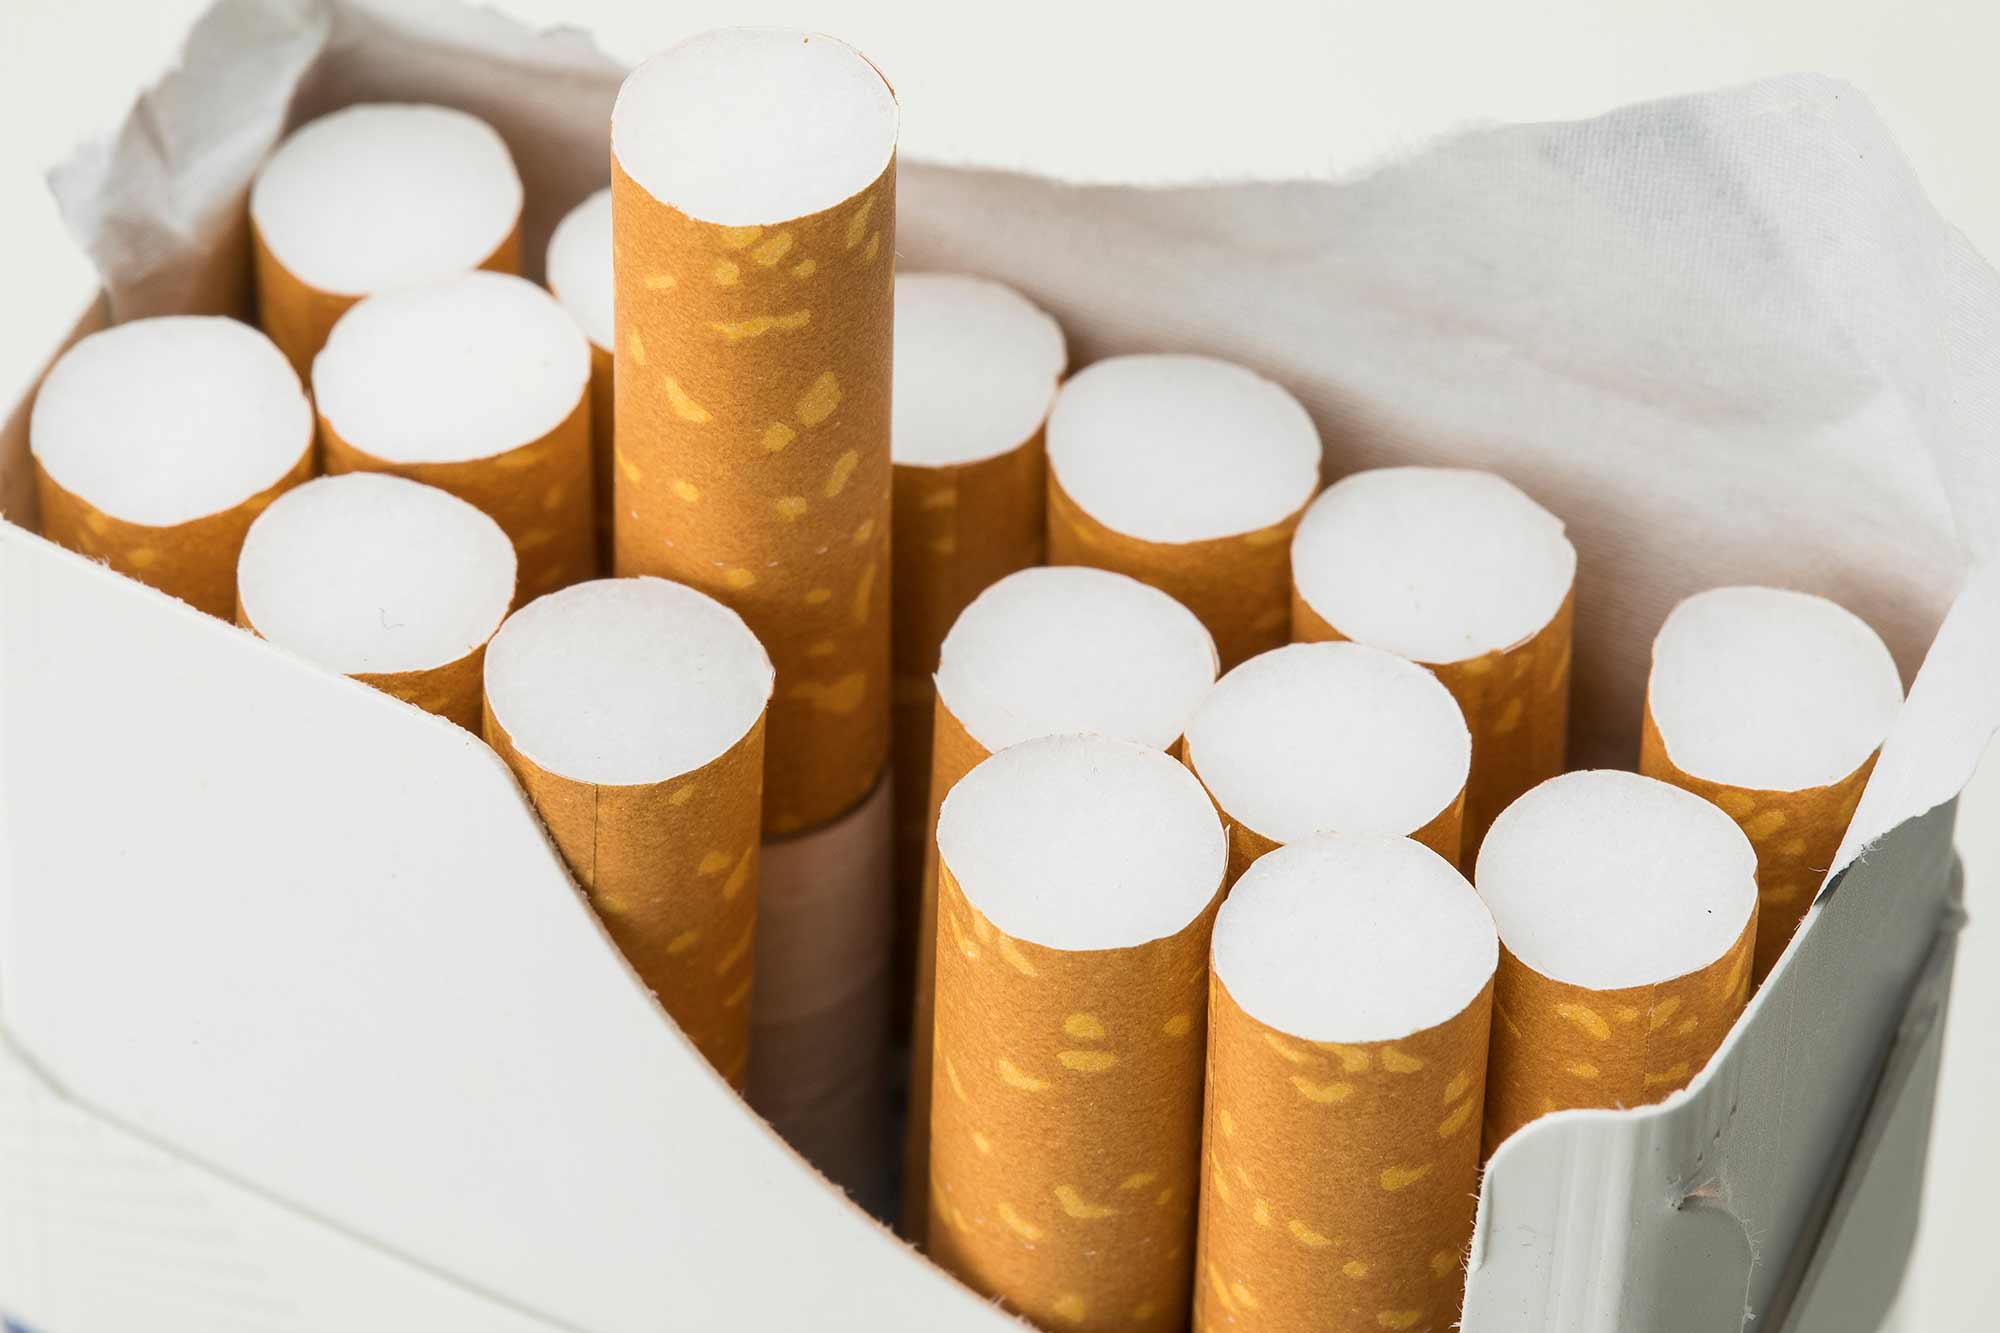 The introduction of plain, standardised packaging has led to a drop in cigarette sales